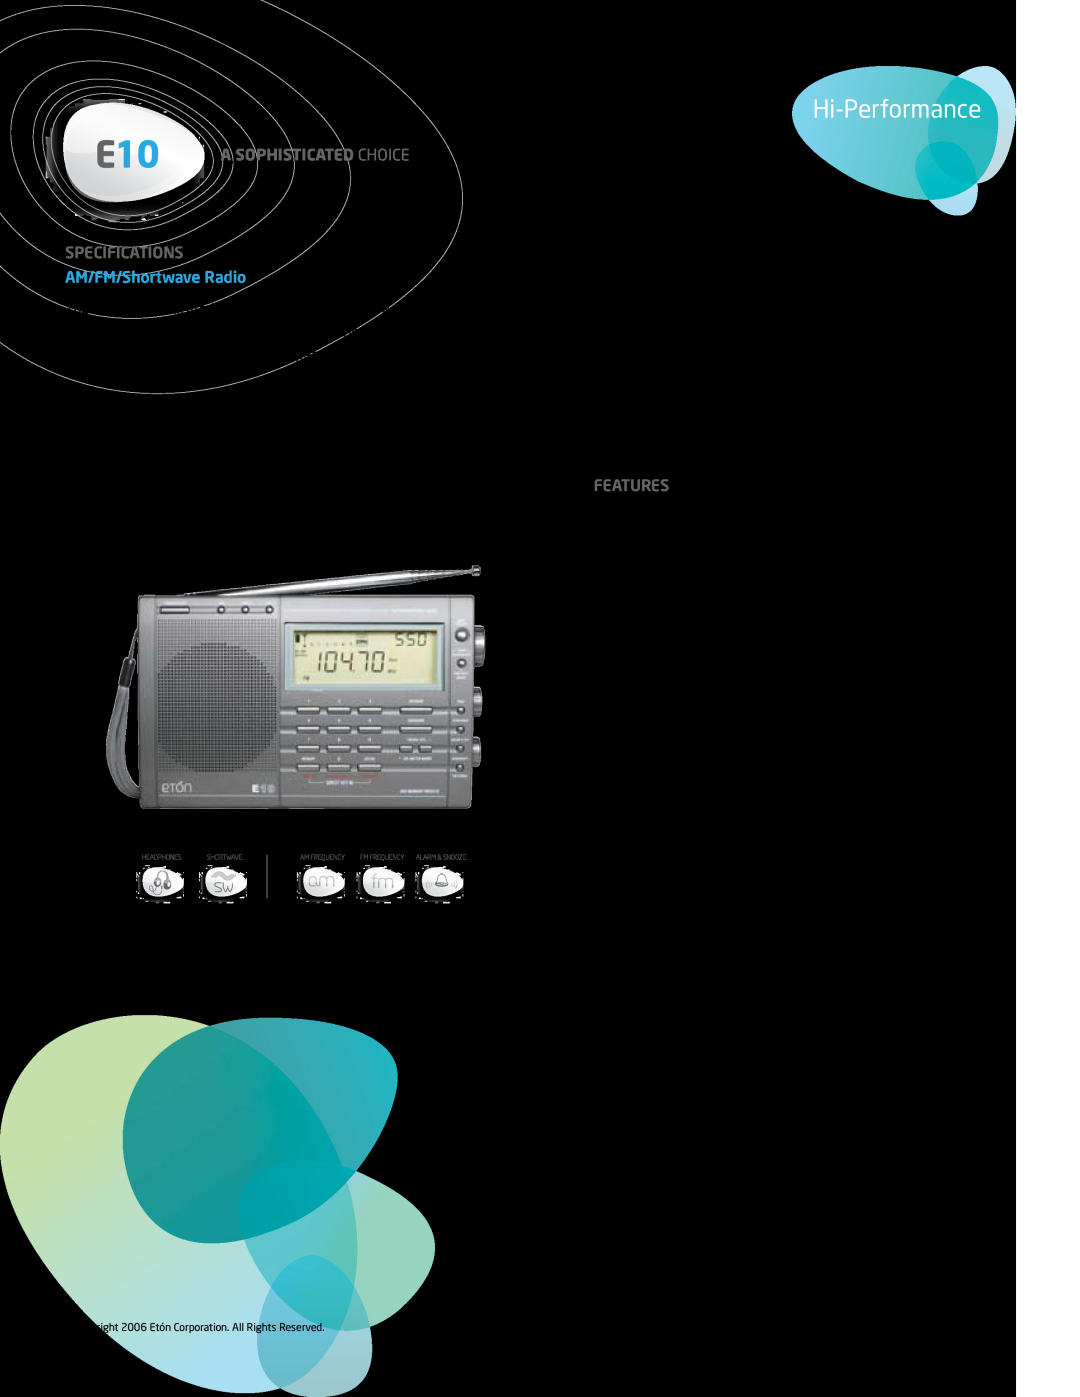 Eton E10 specifications Hi-Performance, Specifications, AM/FM/Shortwave Radio, Features, A Sophisticated Choice 